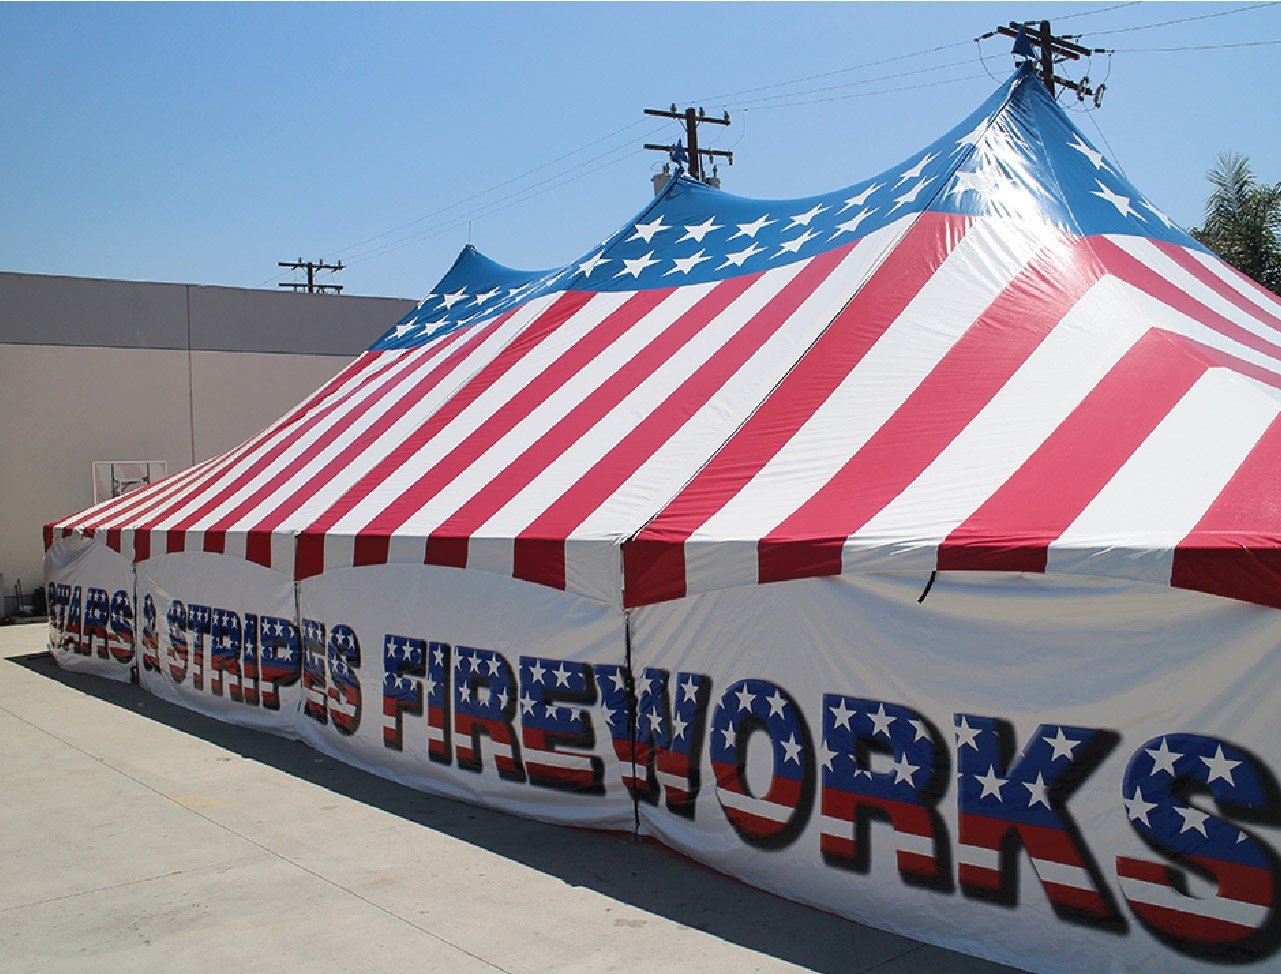 Stars and Stripes USA Patriotic Triple High Peak Frame Tent with stars and straps fireworks printed all across the side of the visible wall